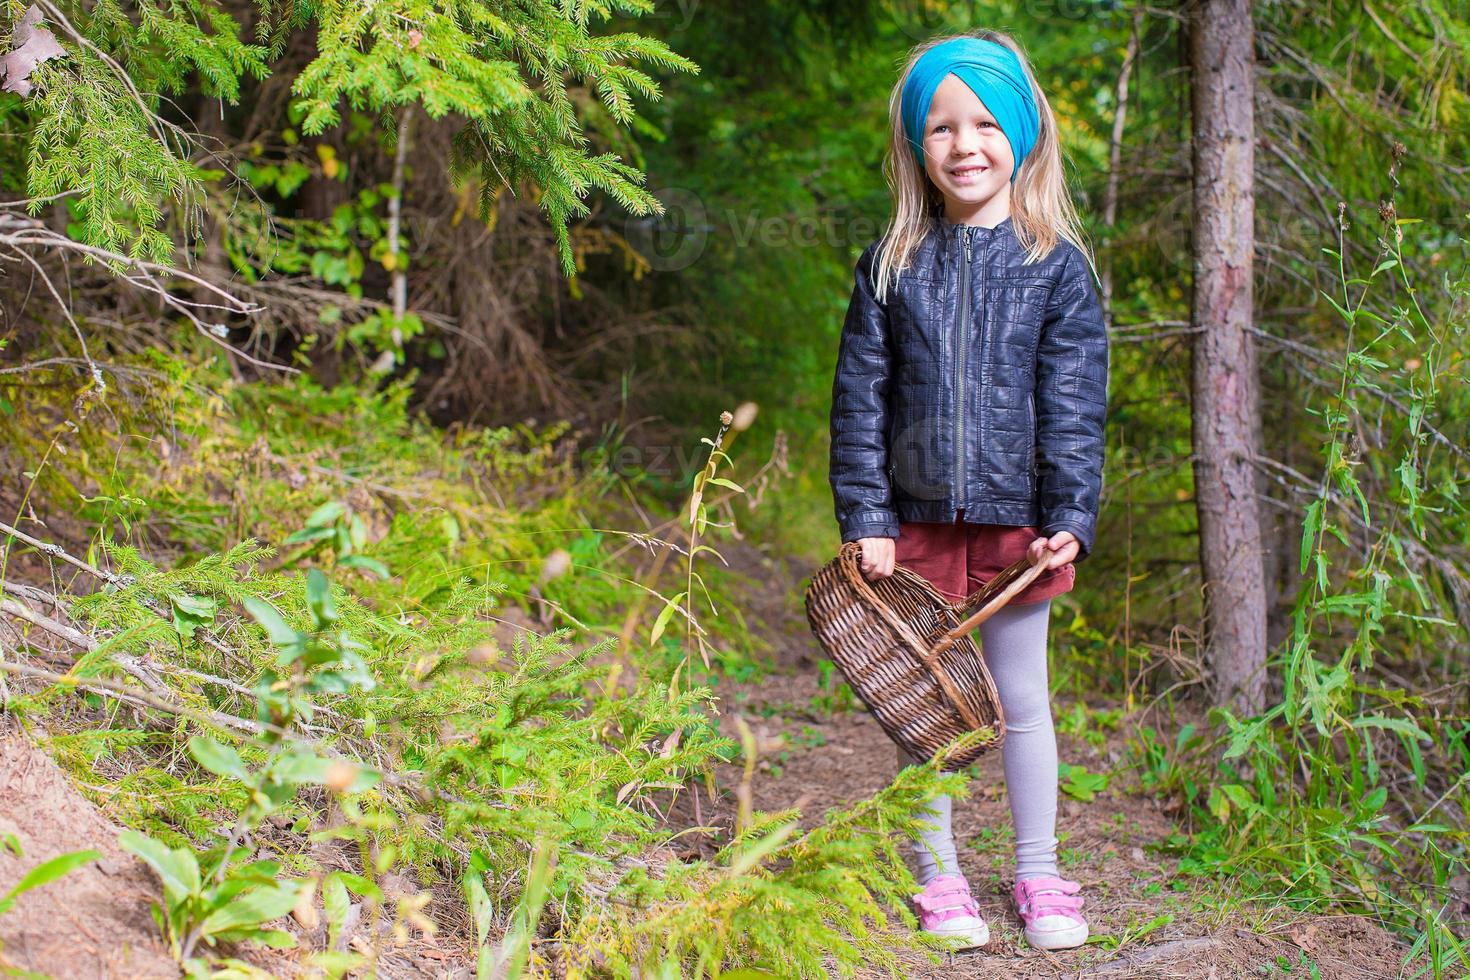 Little adorable girl pick up mushrooms in autumn forest photo